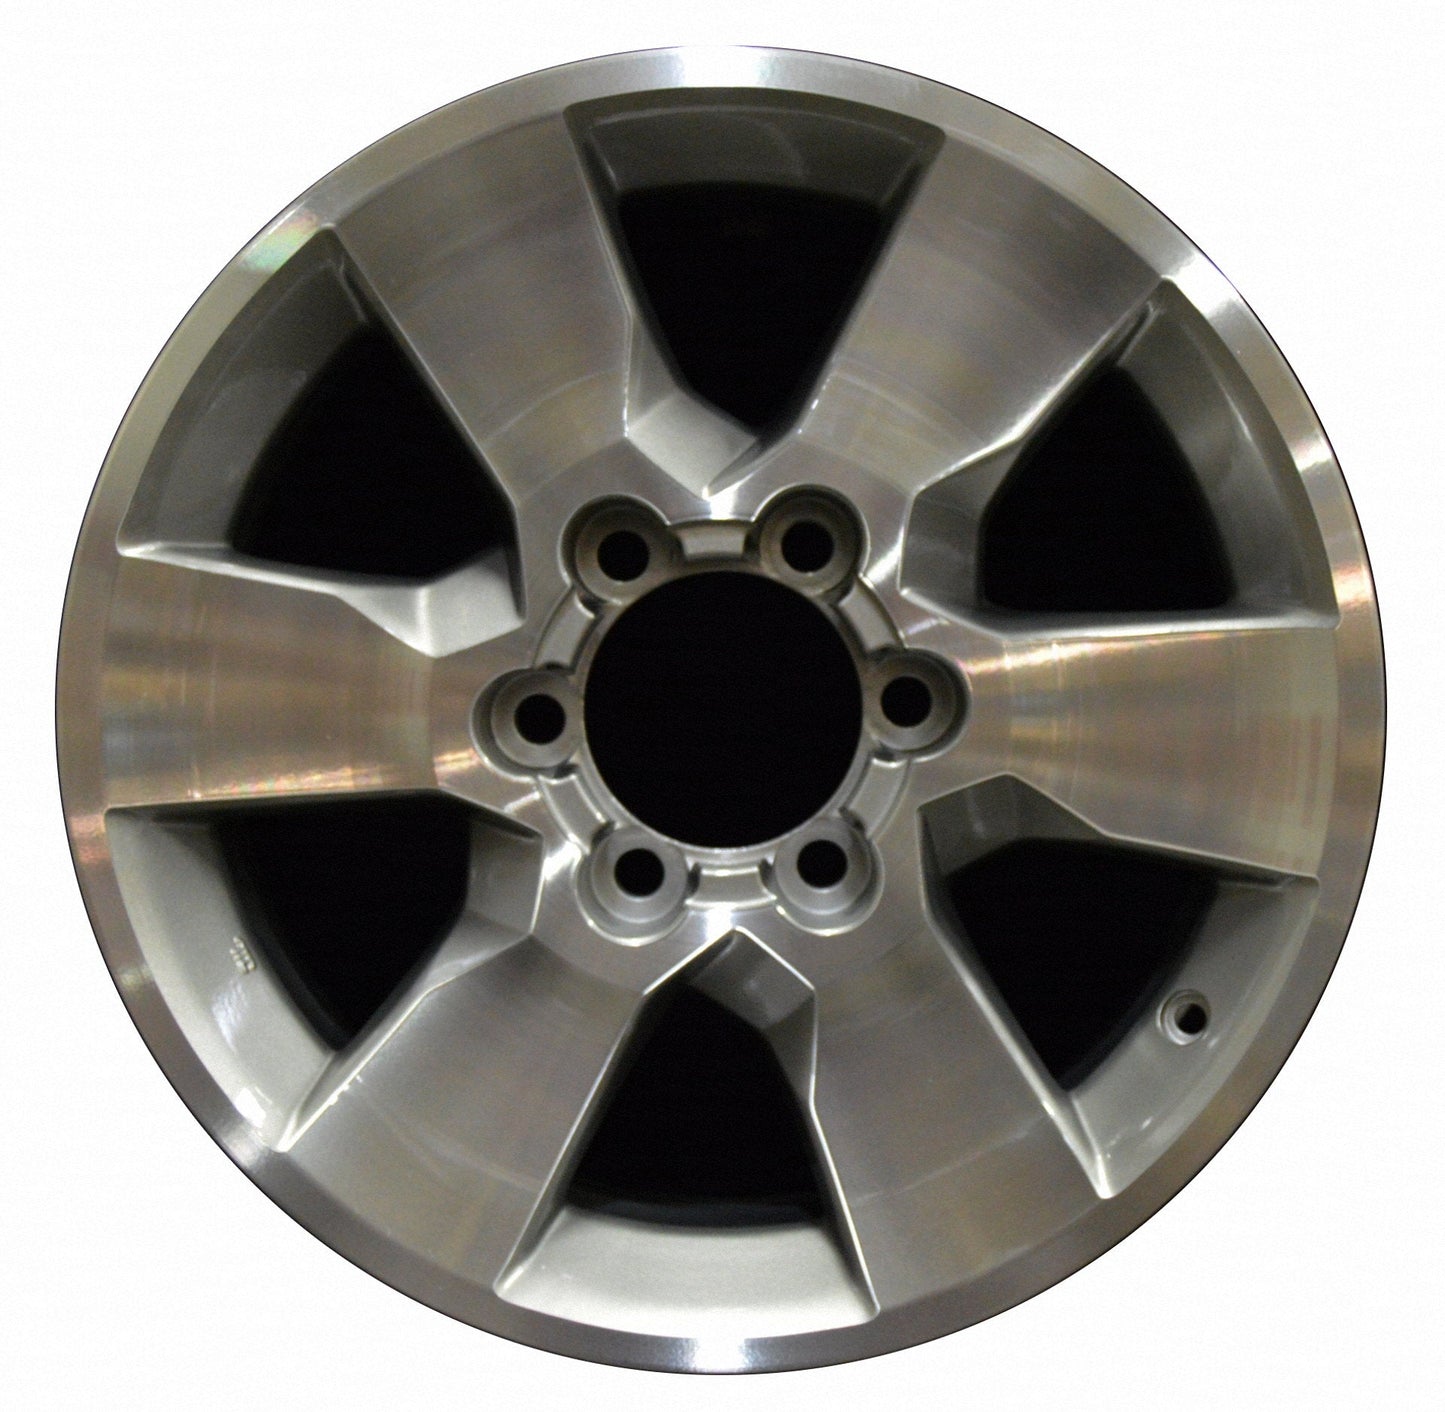 Toyota 4 Runner  2010, 2011, 2012, 2013 Factory OEM Car Wheel Size 17x7 Alloy WAO.69562.LC210.MA